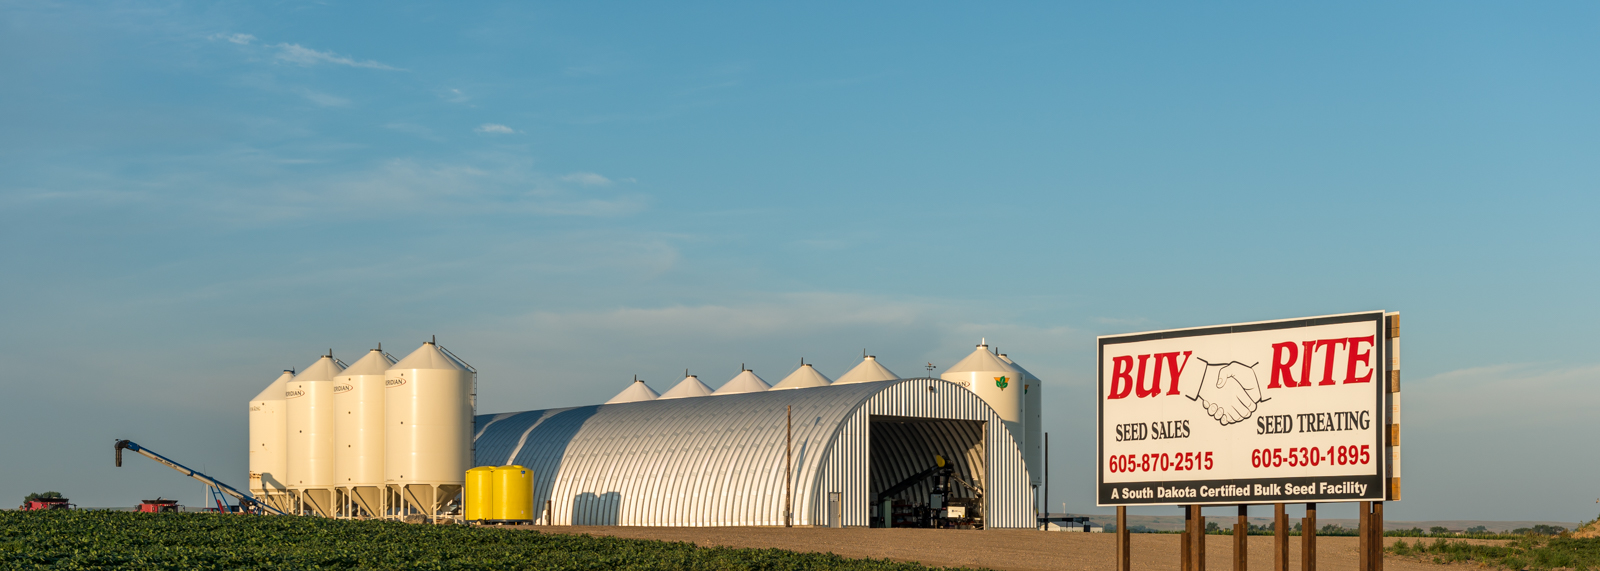 The Buy Rite seed sales and seed treating facility